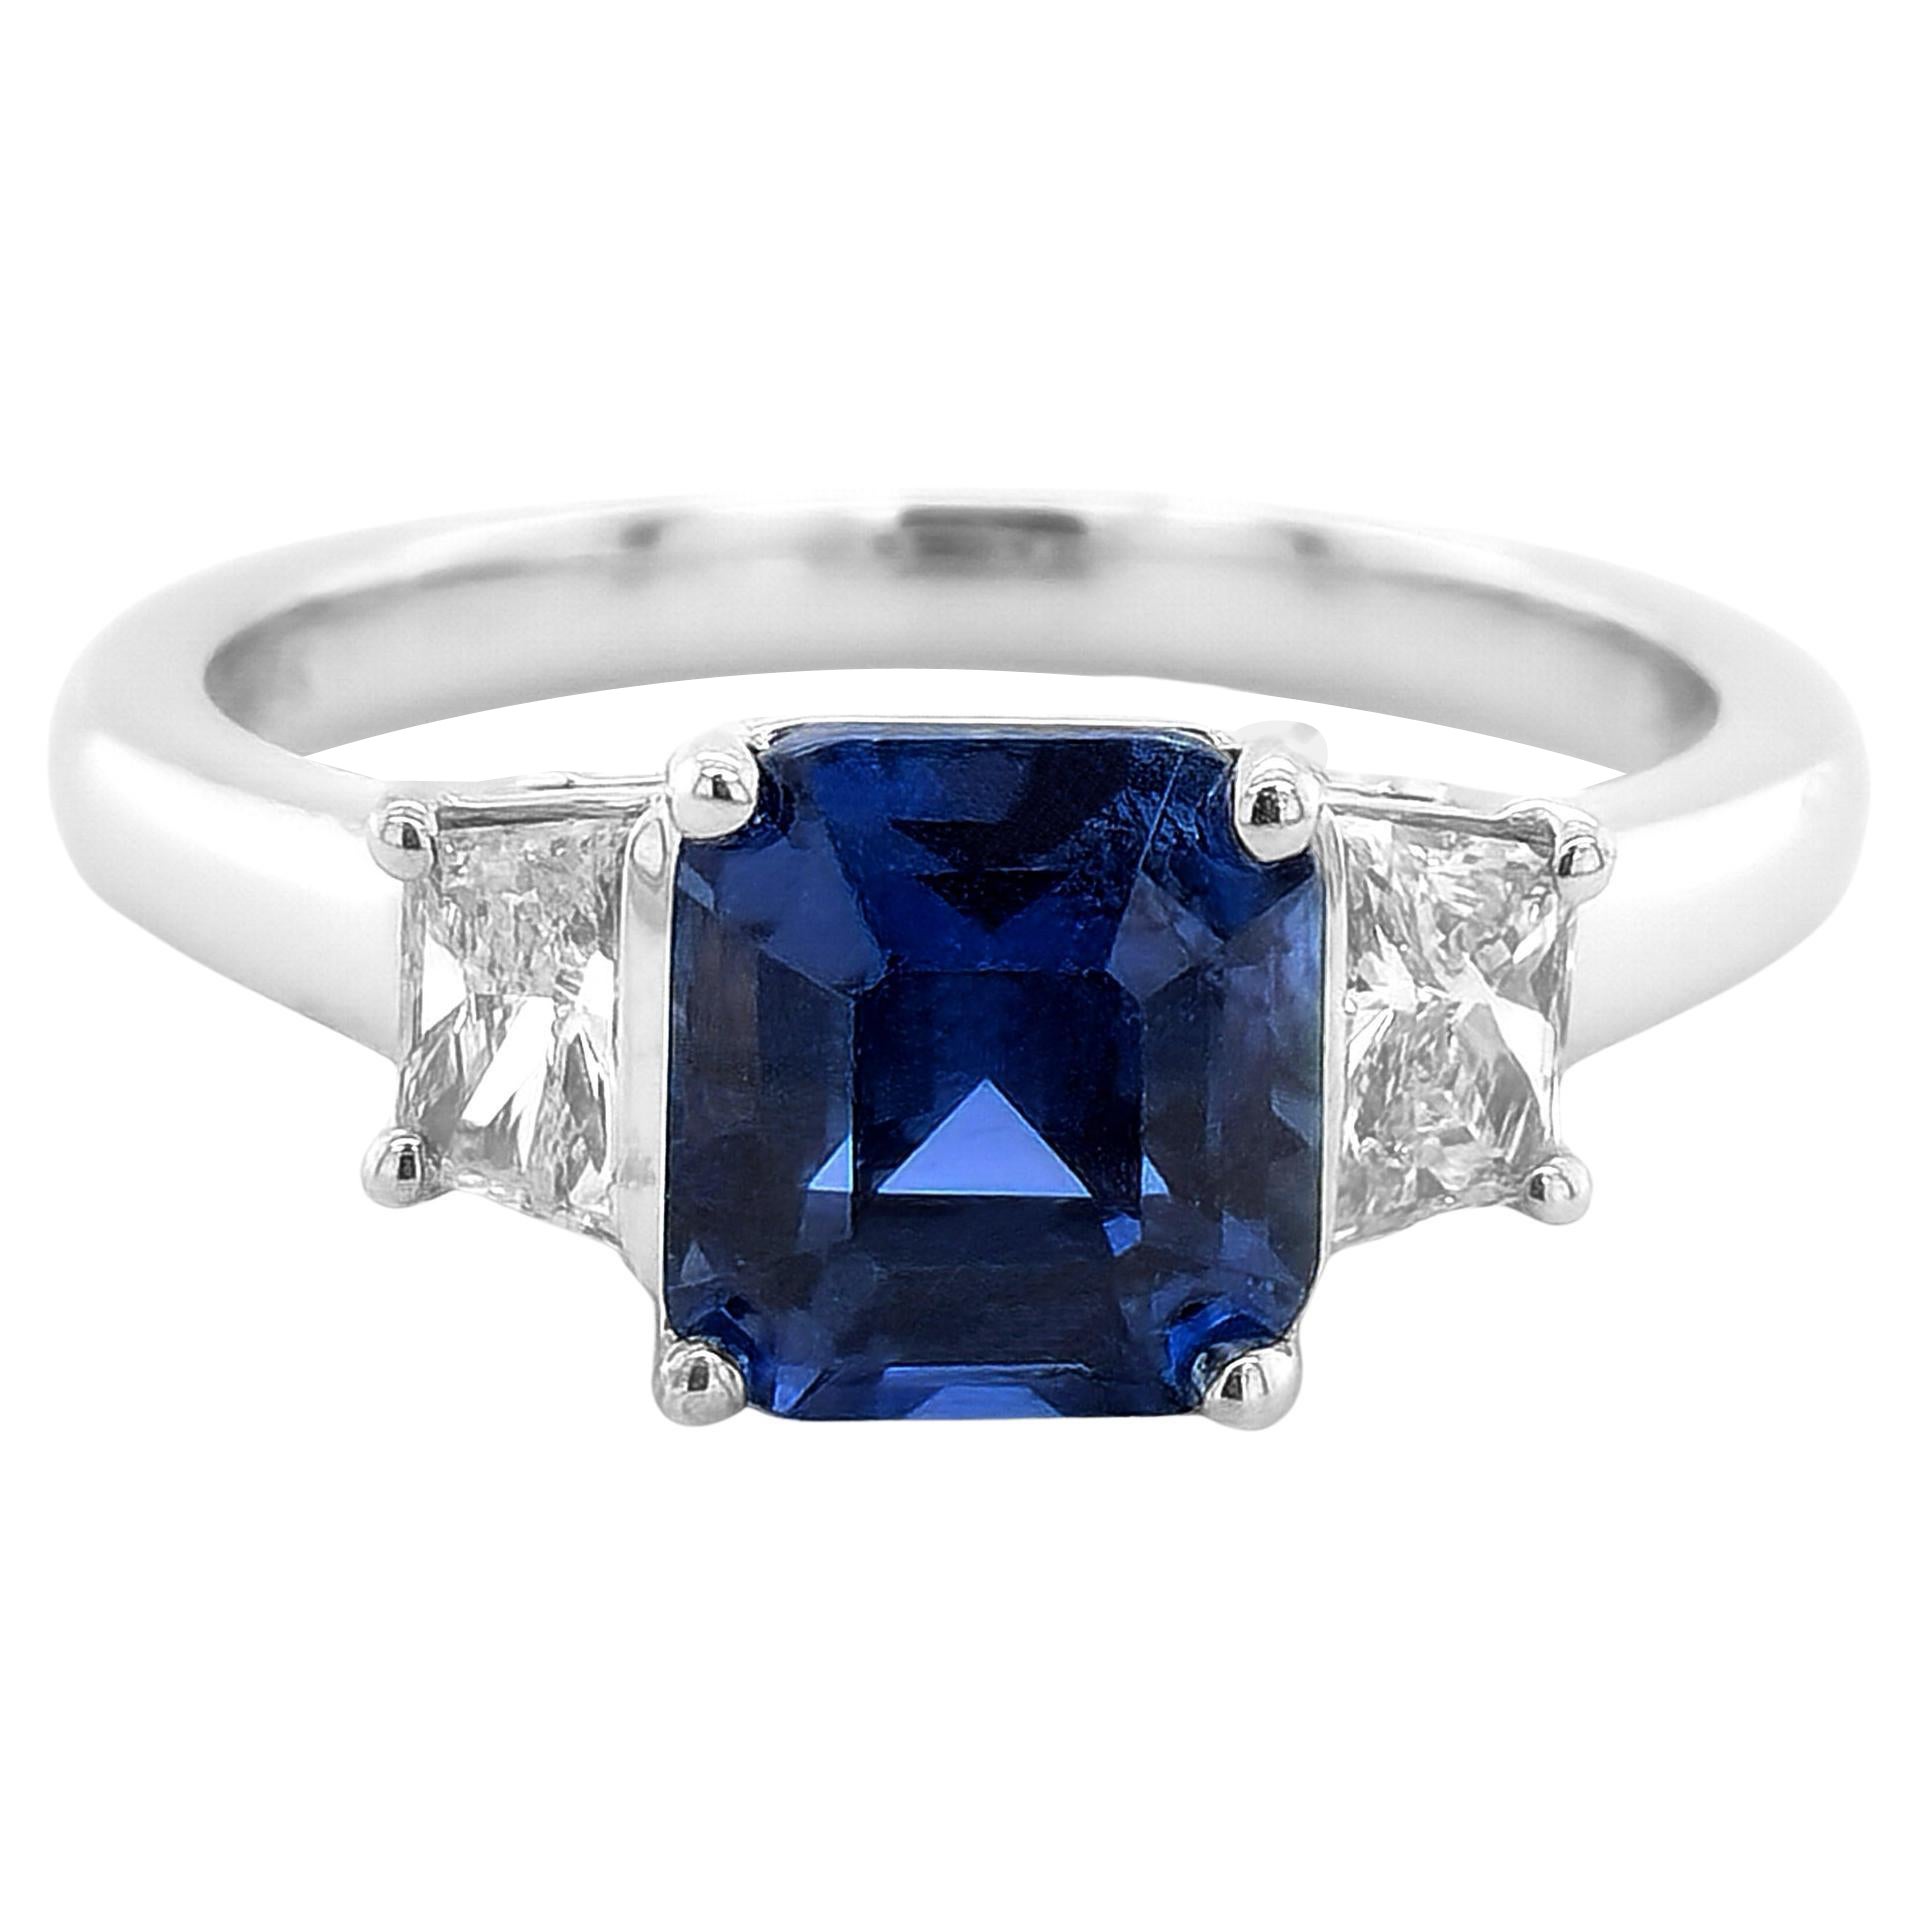 What is cobalt spinel?